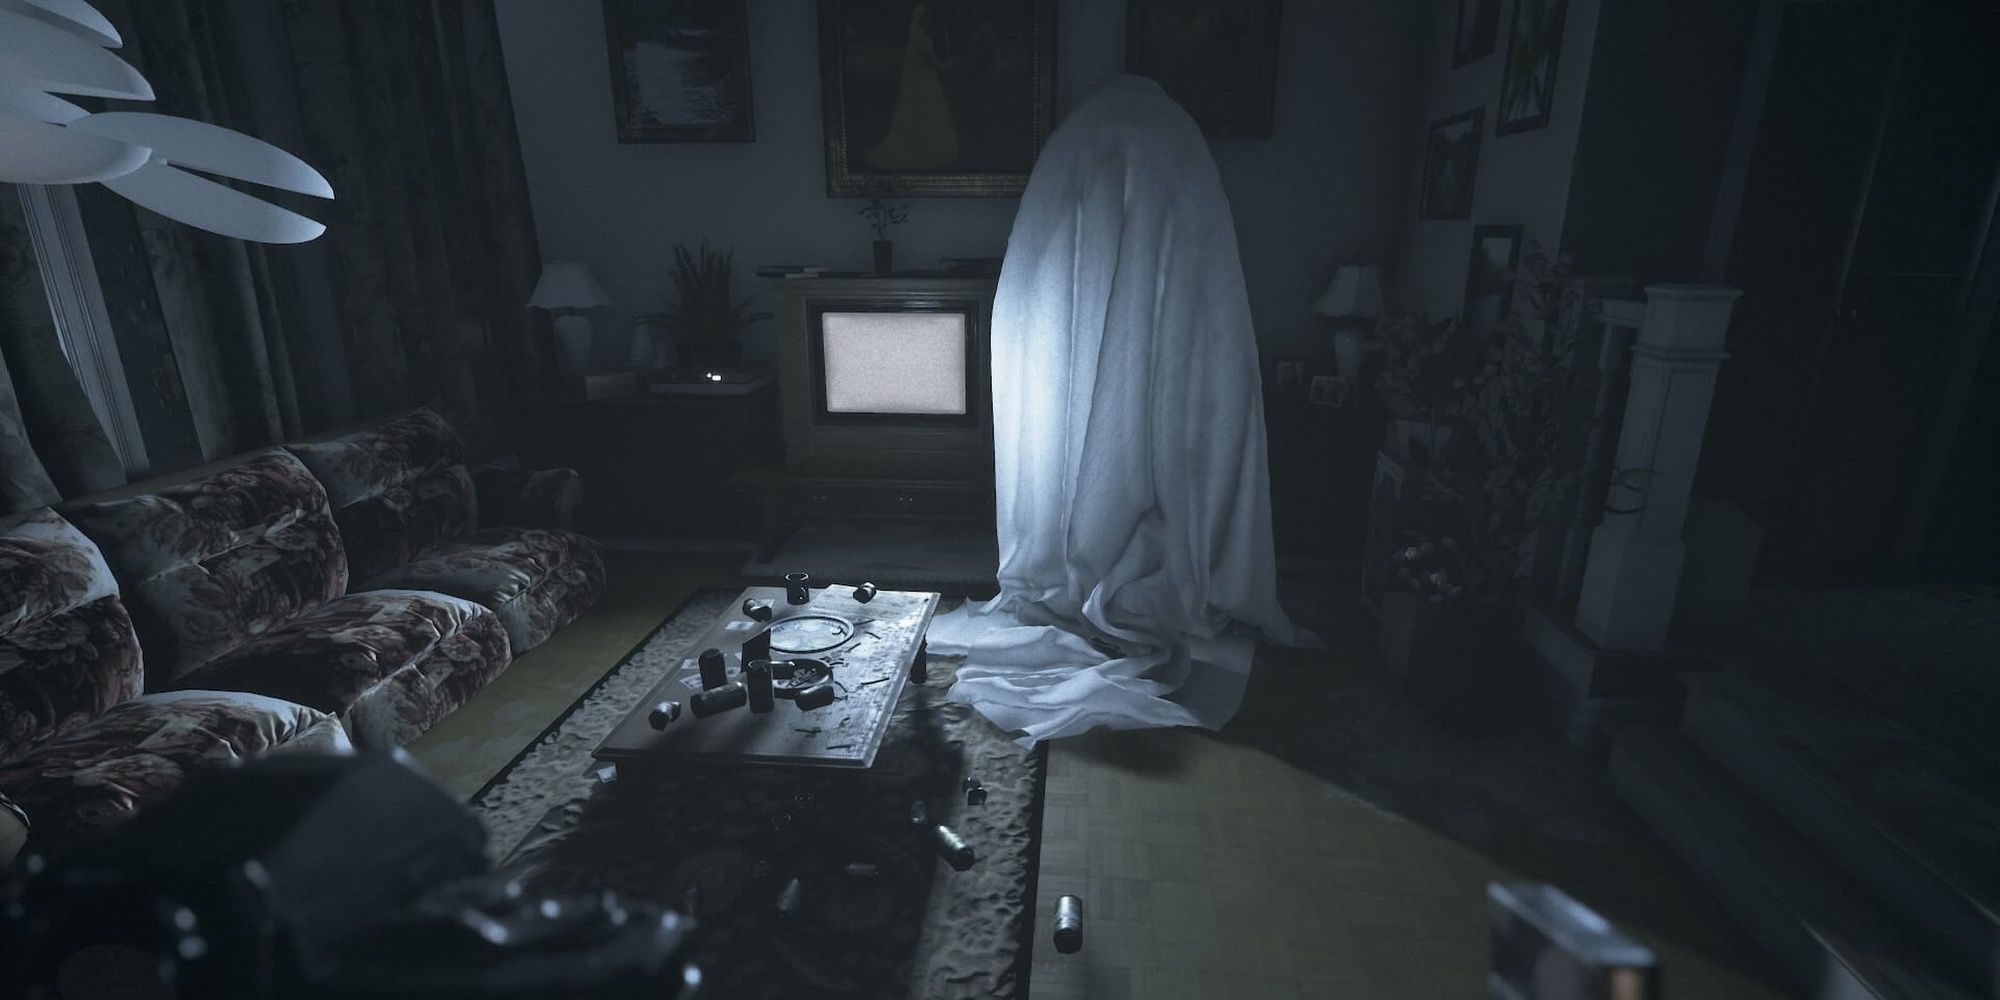 Visage: A Ghost Wearing A Sheet In The Dark Living Room